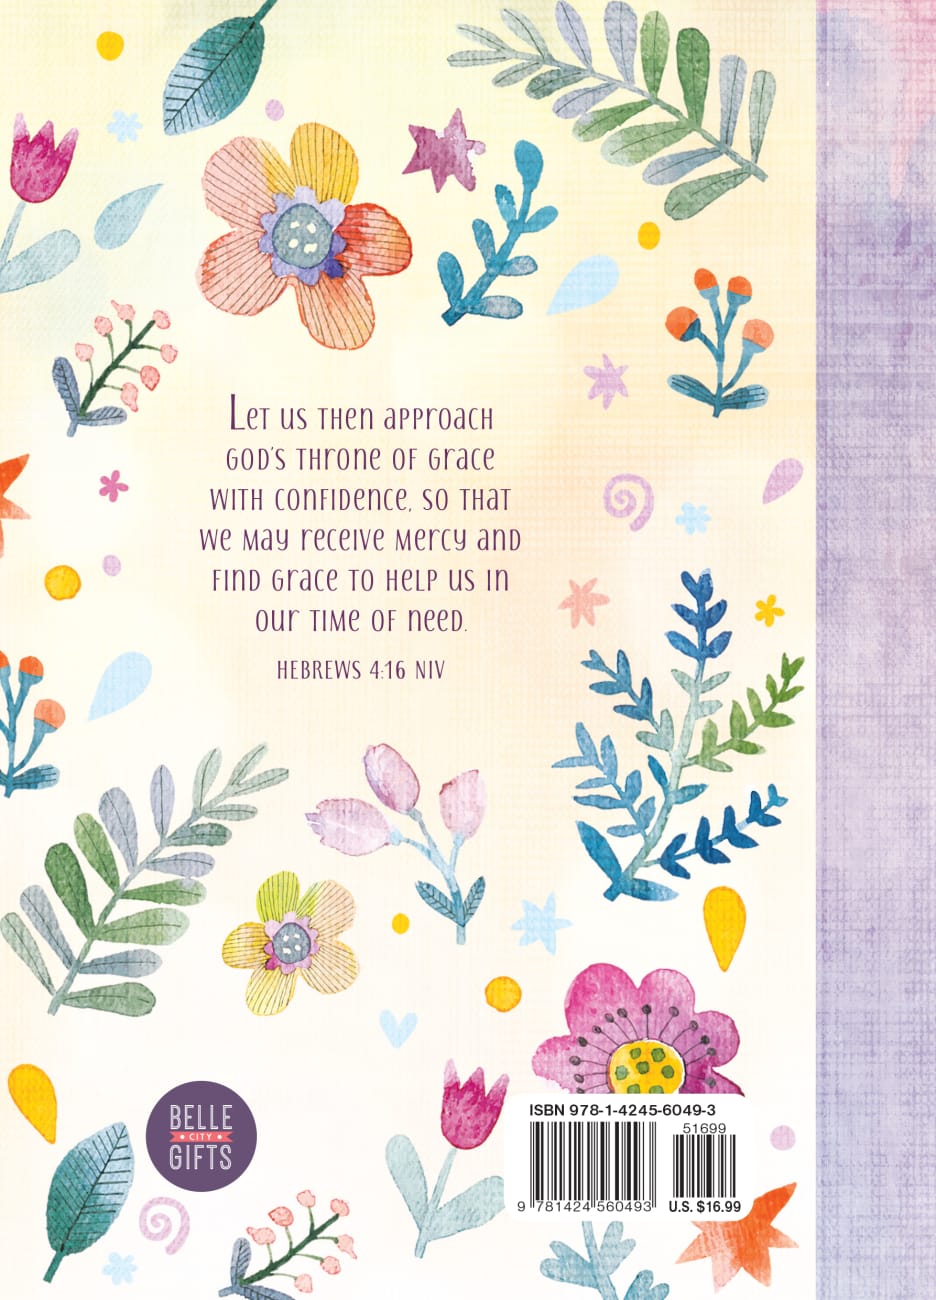 Journal: Amazing Grace, Floral Fabric